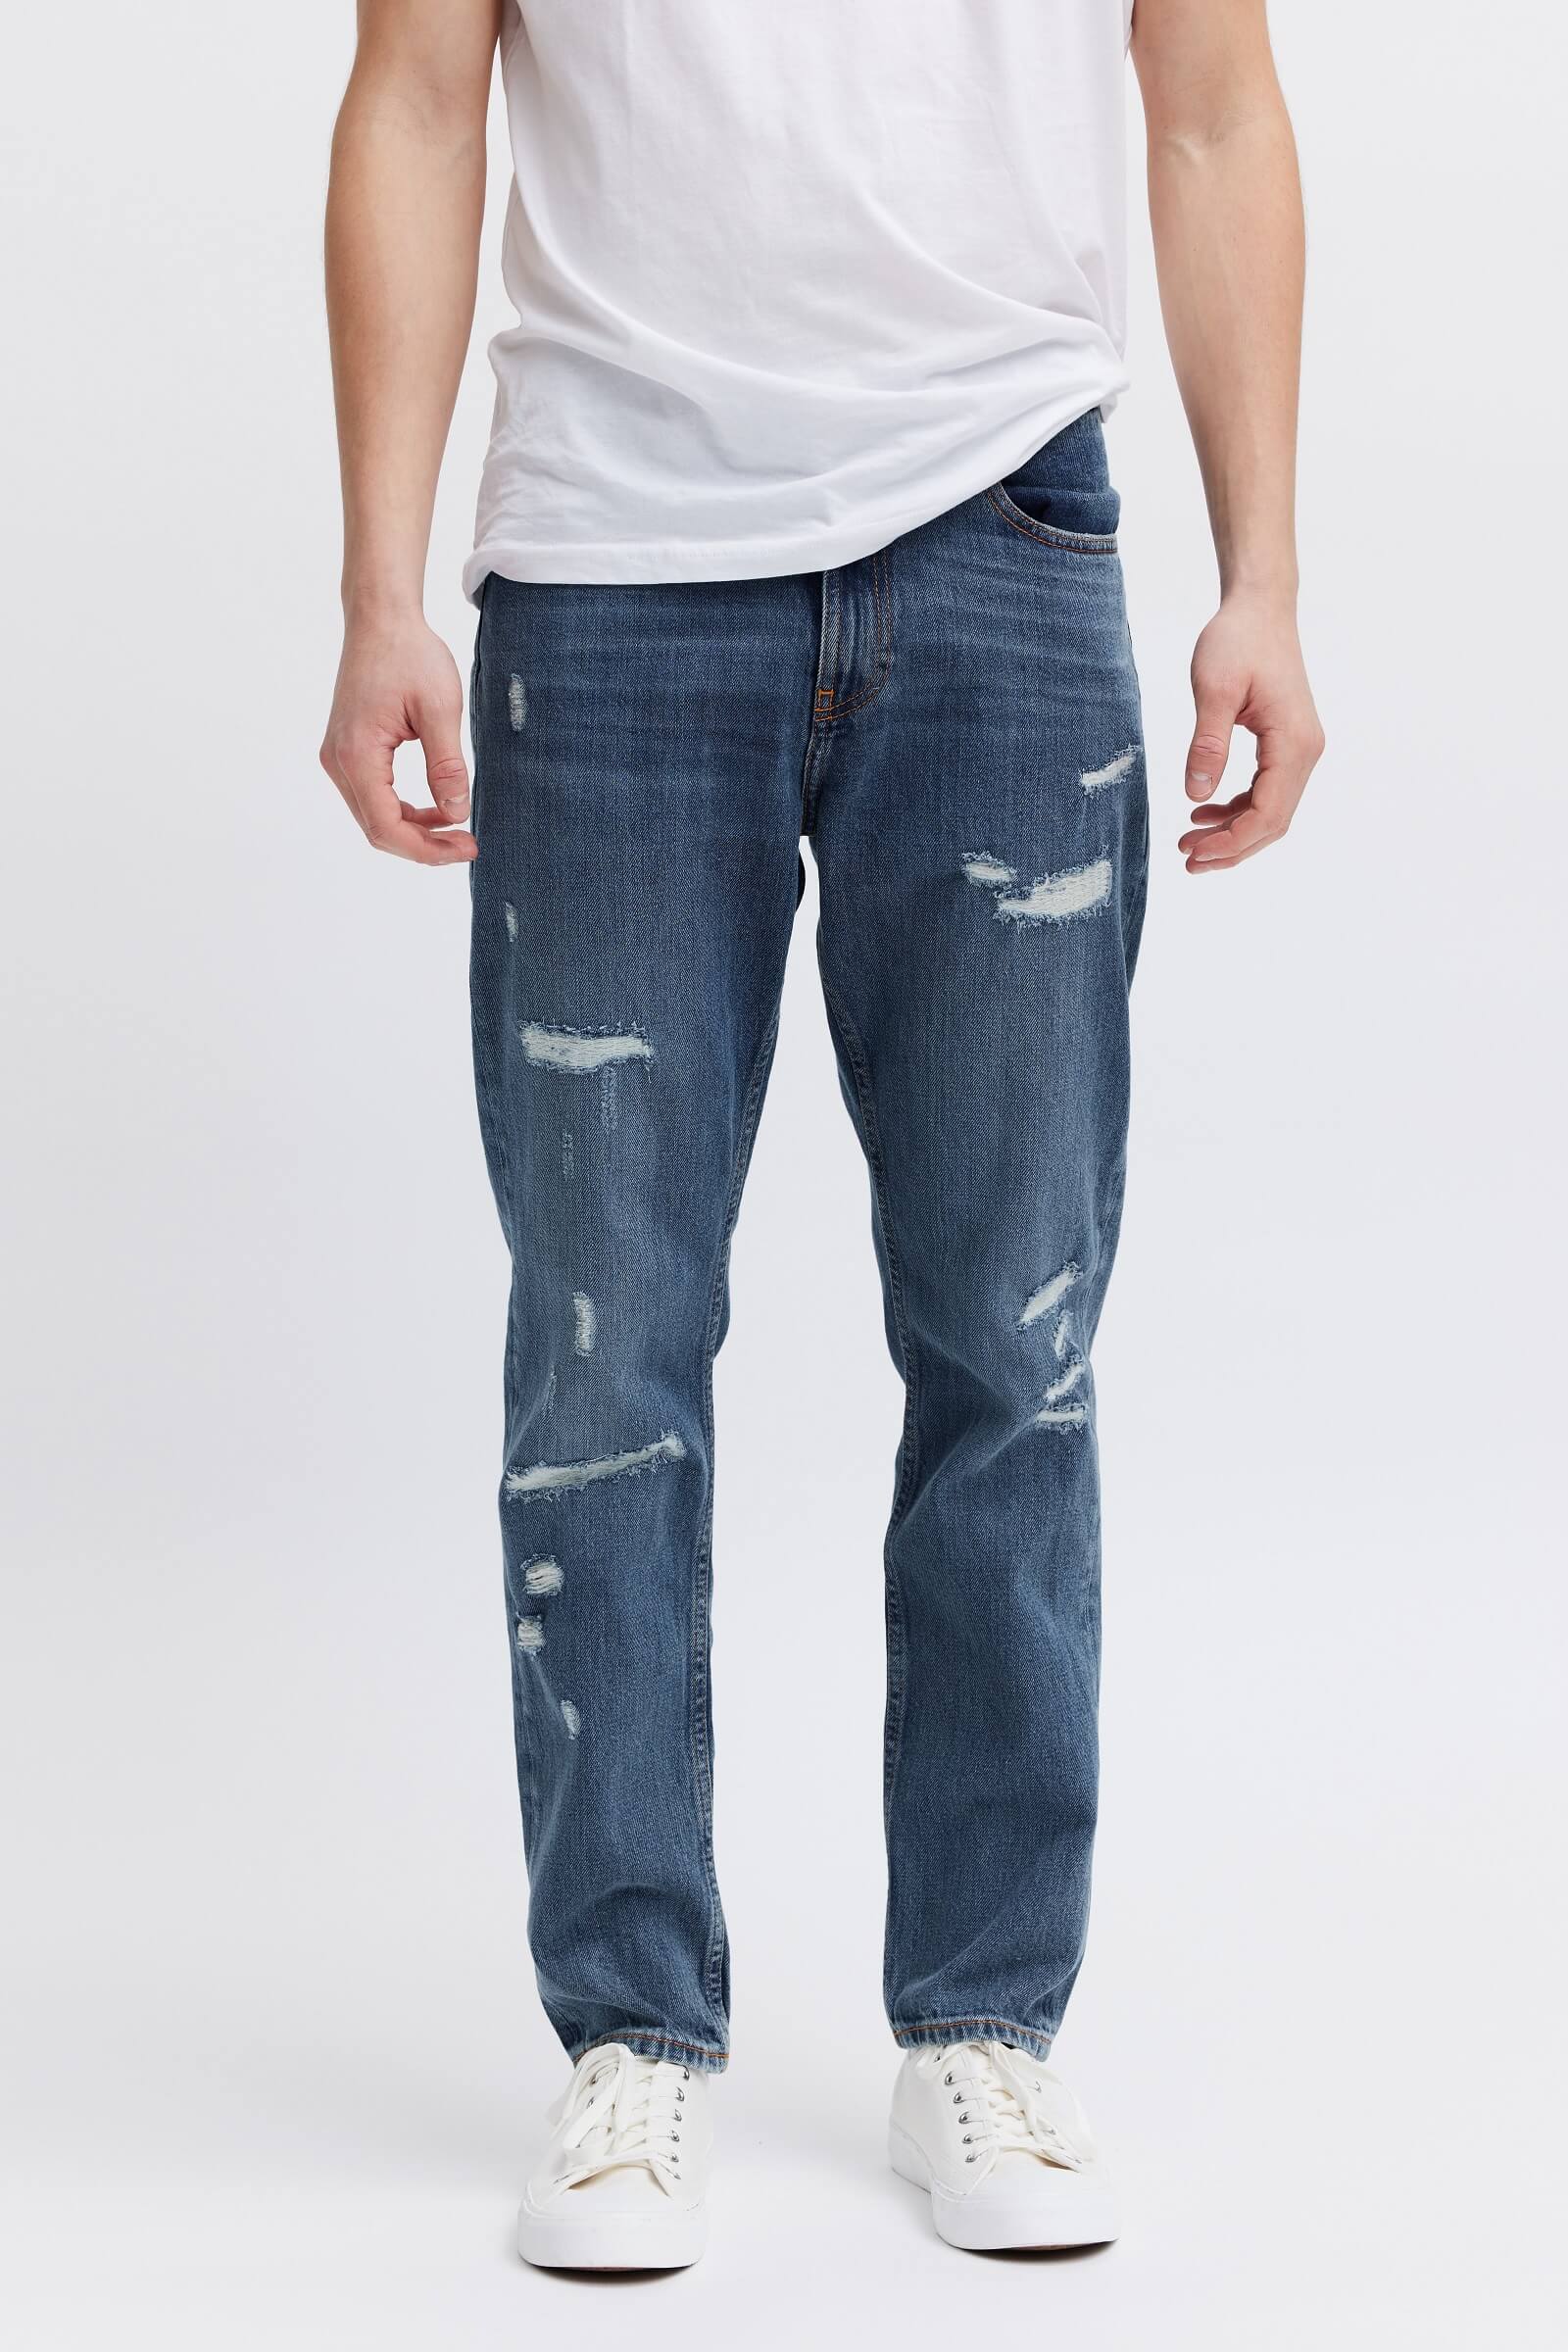 Organic jeans with rips